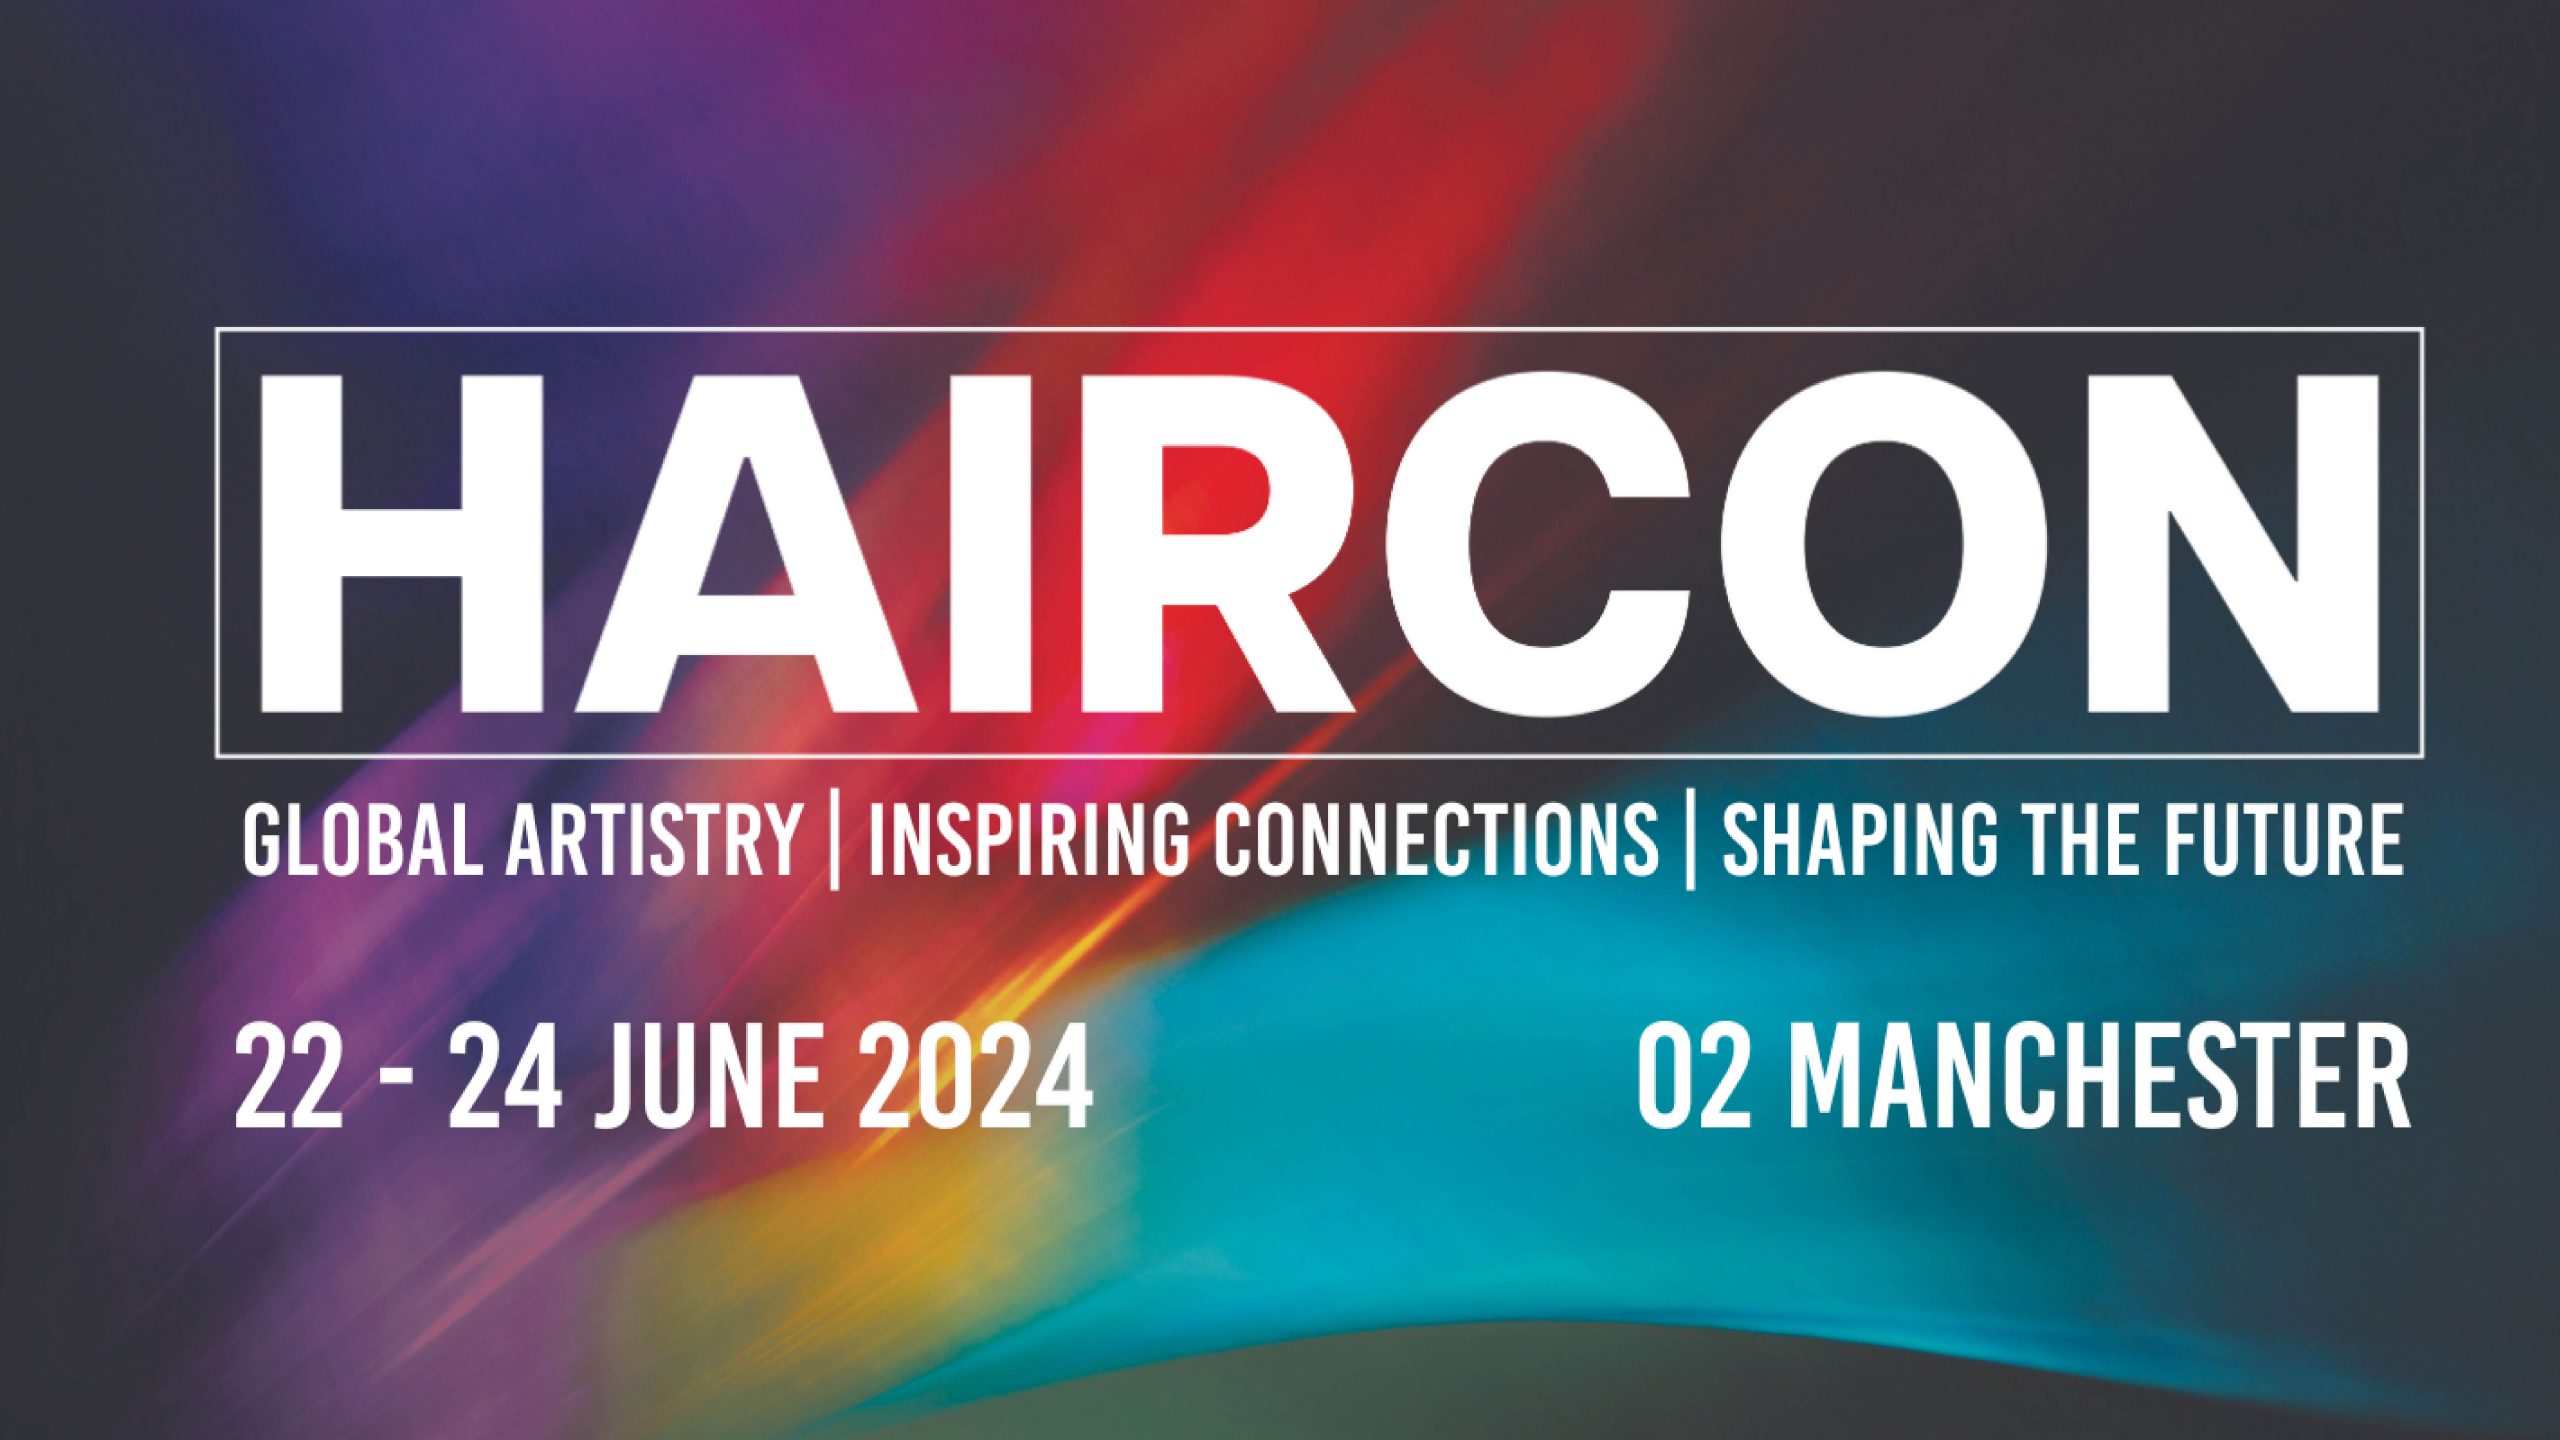 Introducing HairCon 2024 A world of Hair Innovation, Inspiration and